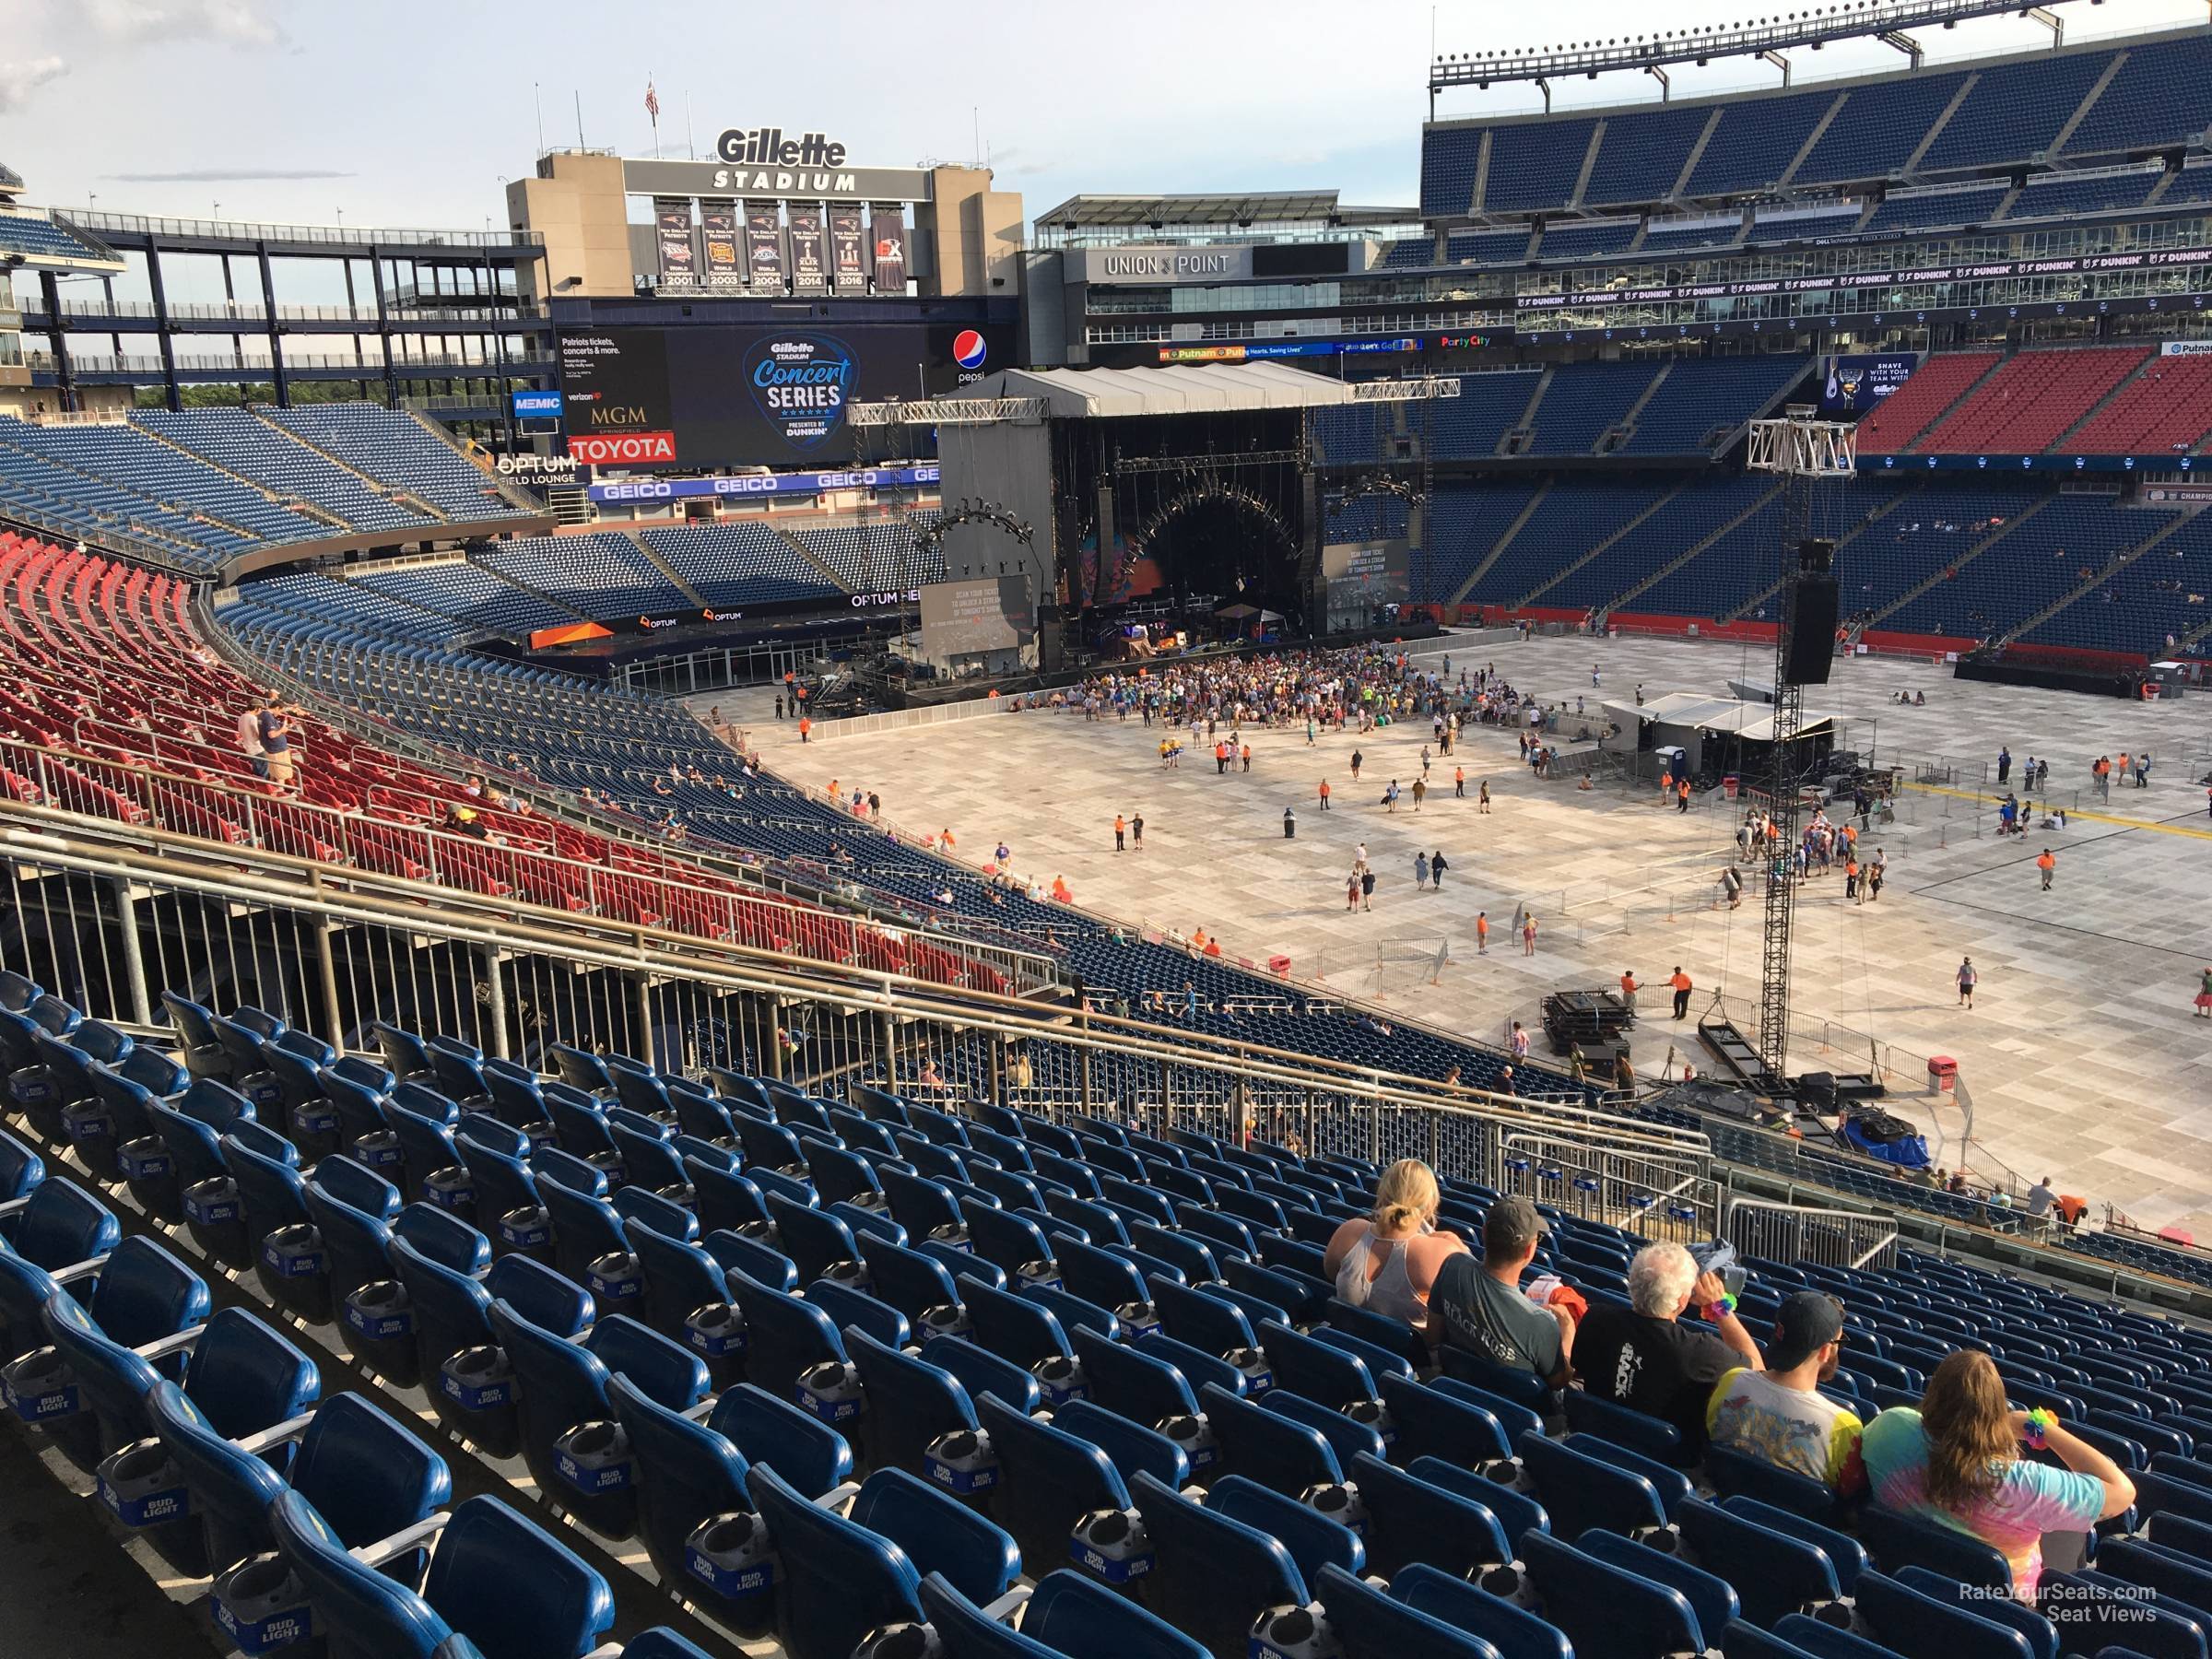 Gillette Stadium Section 205 Concert Seating - RateYourSeats.com